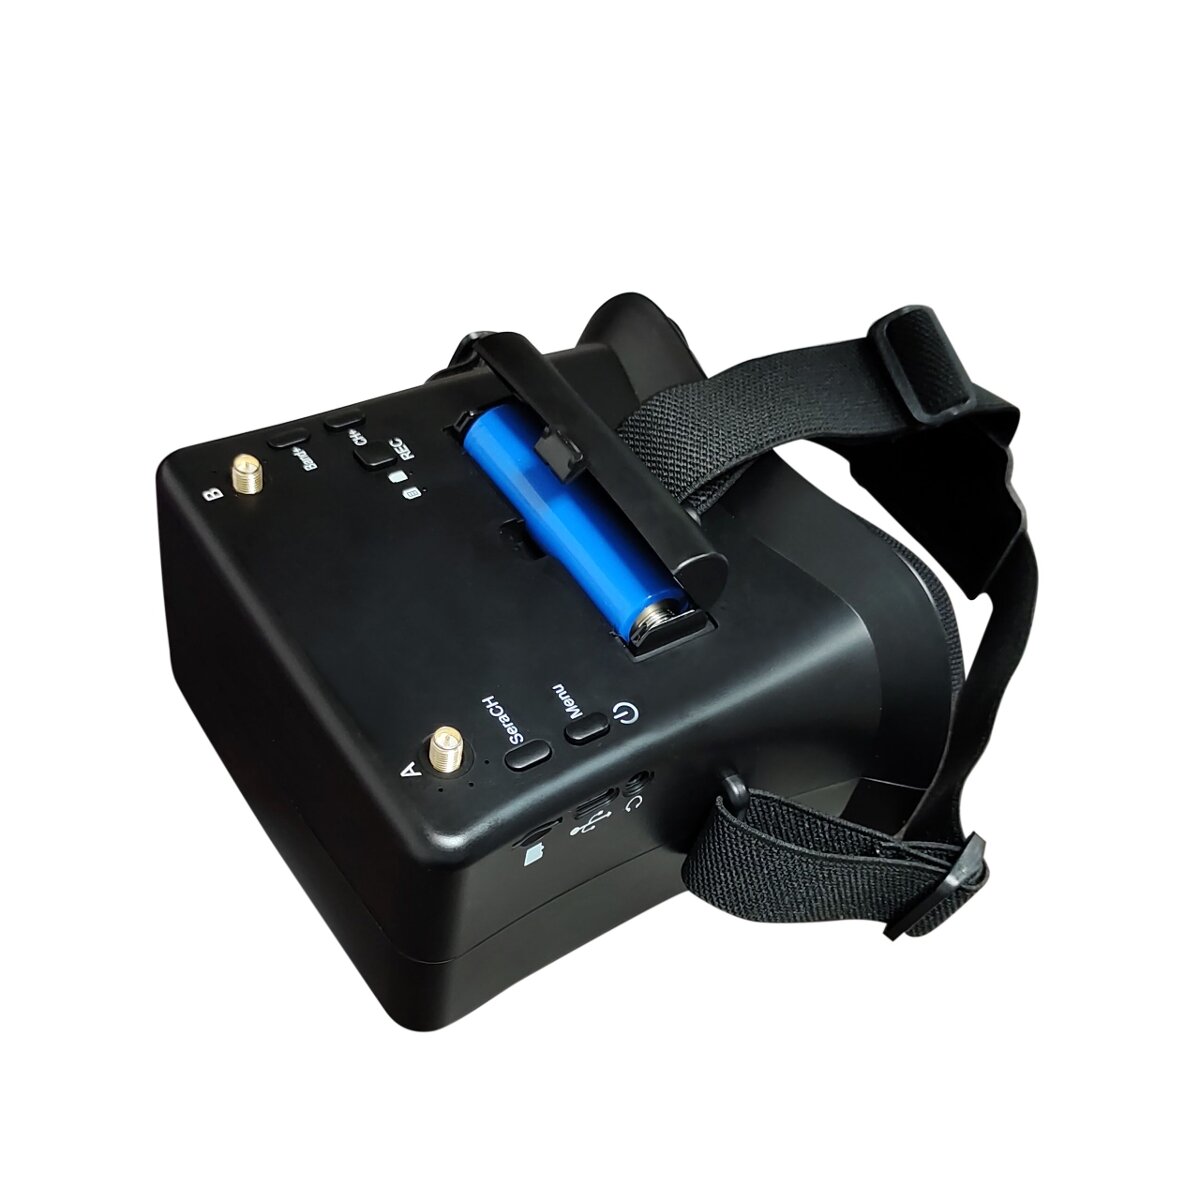 SJ RHD430 5.8Ghz 40CH FPV Goggles 800*480 4.3 Inch Support DVR Diversity Receiver with Battery